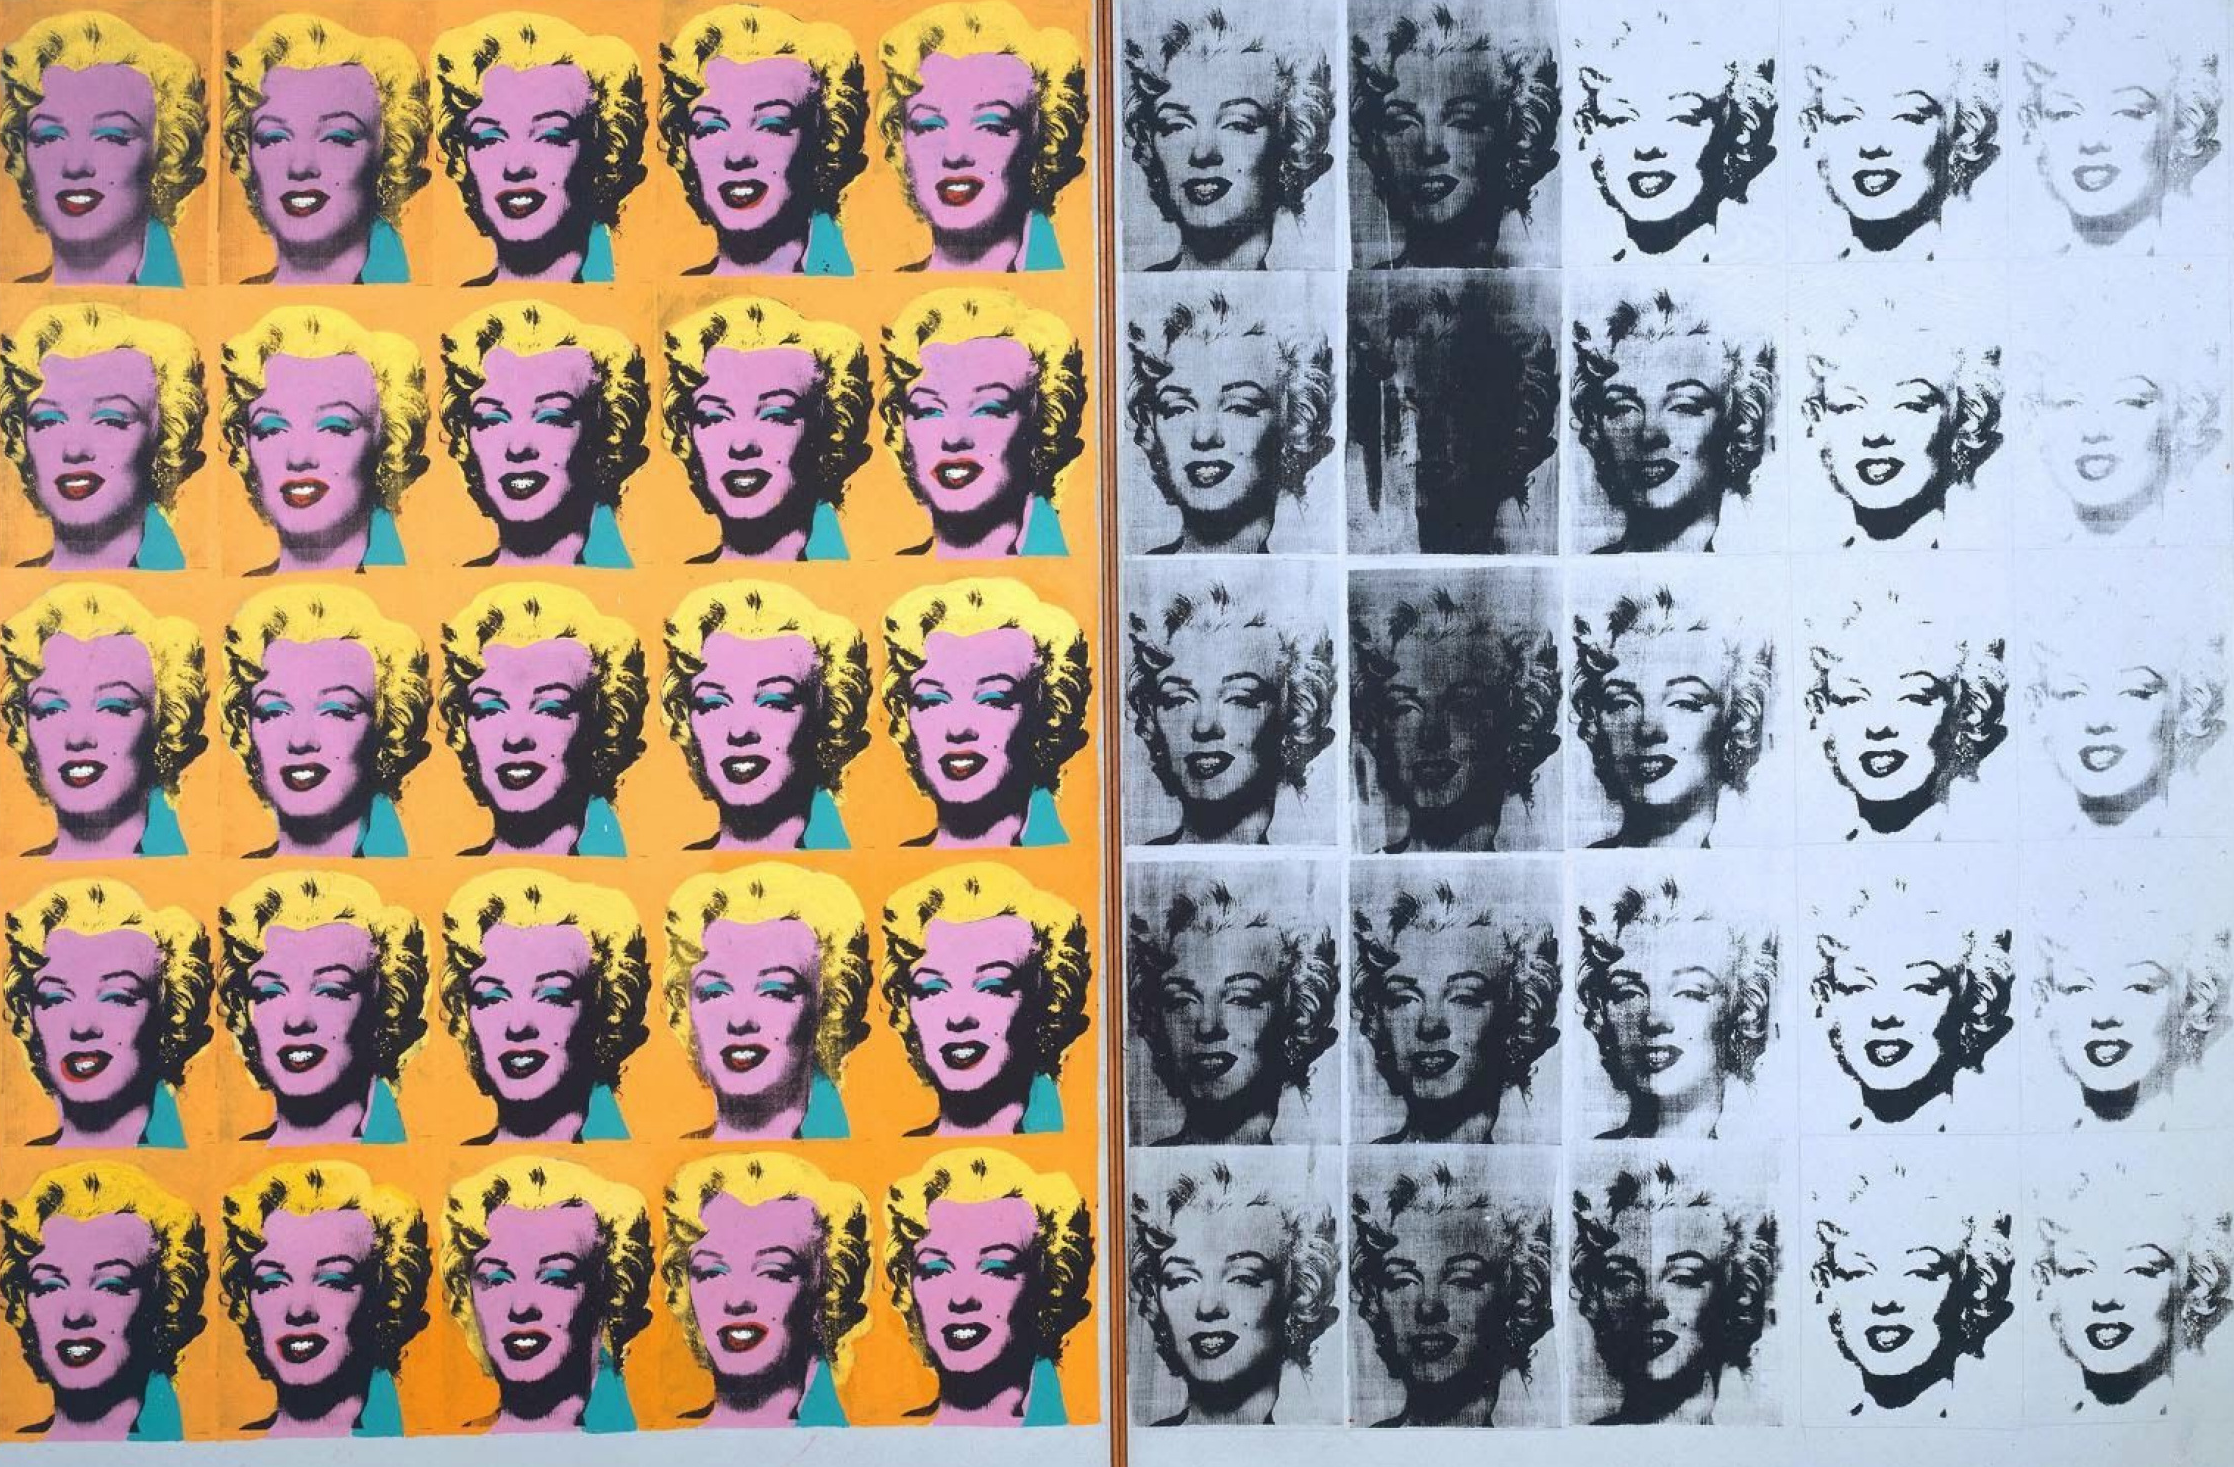 Marilyn Diptych by Andy Warhol, 1962